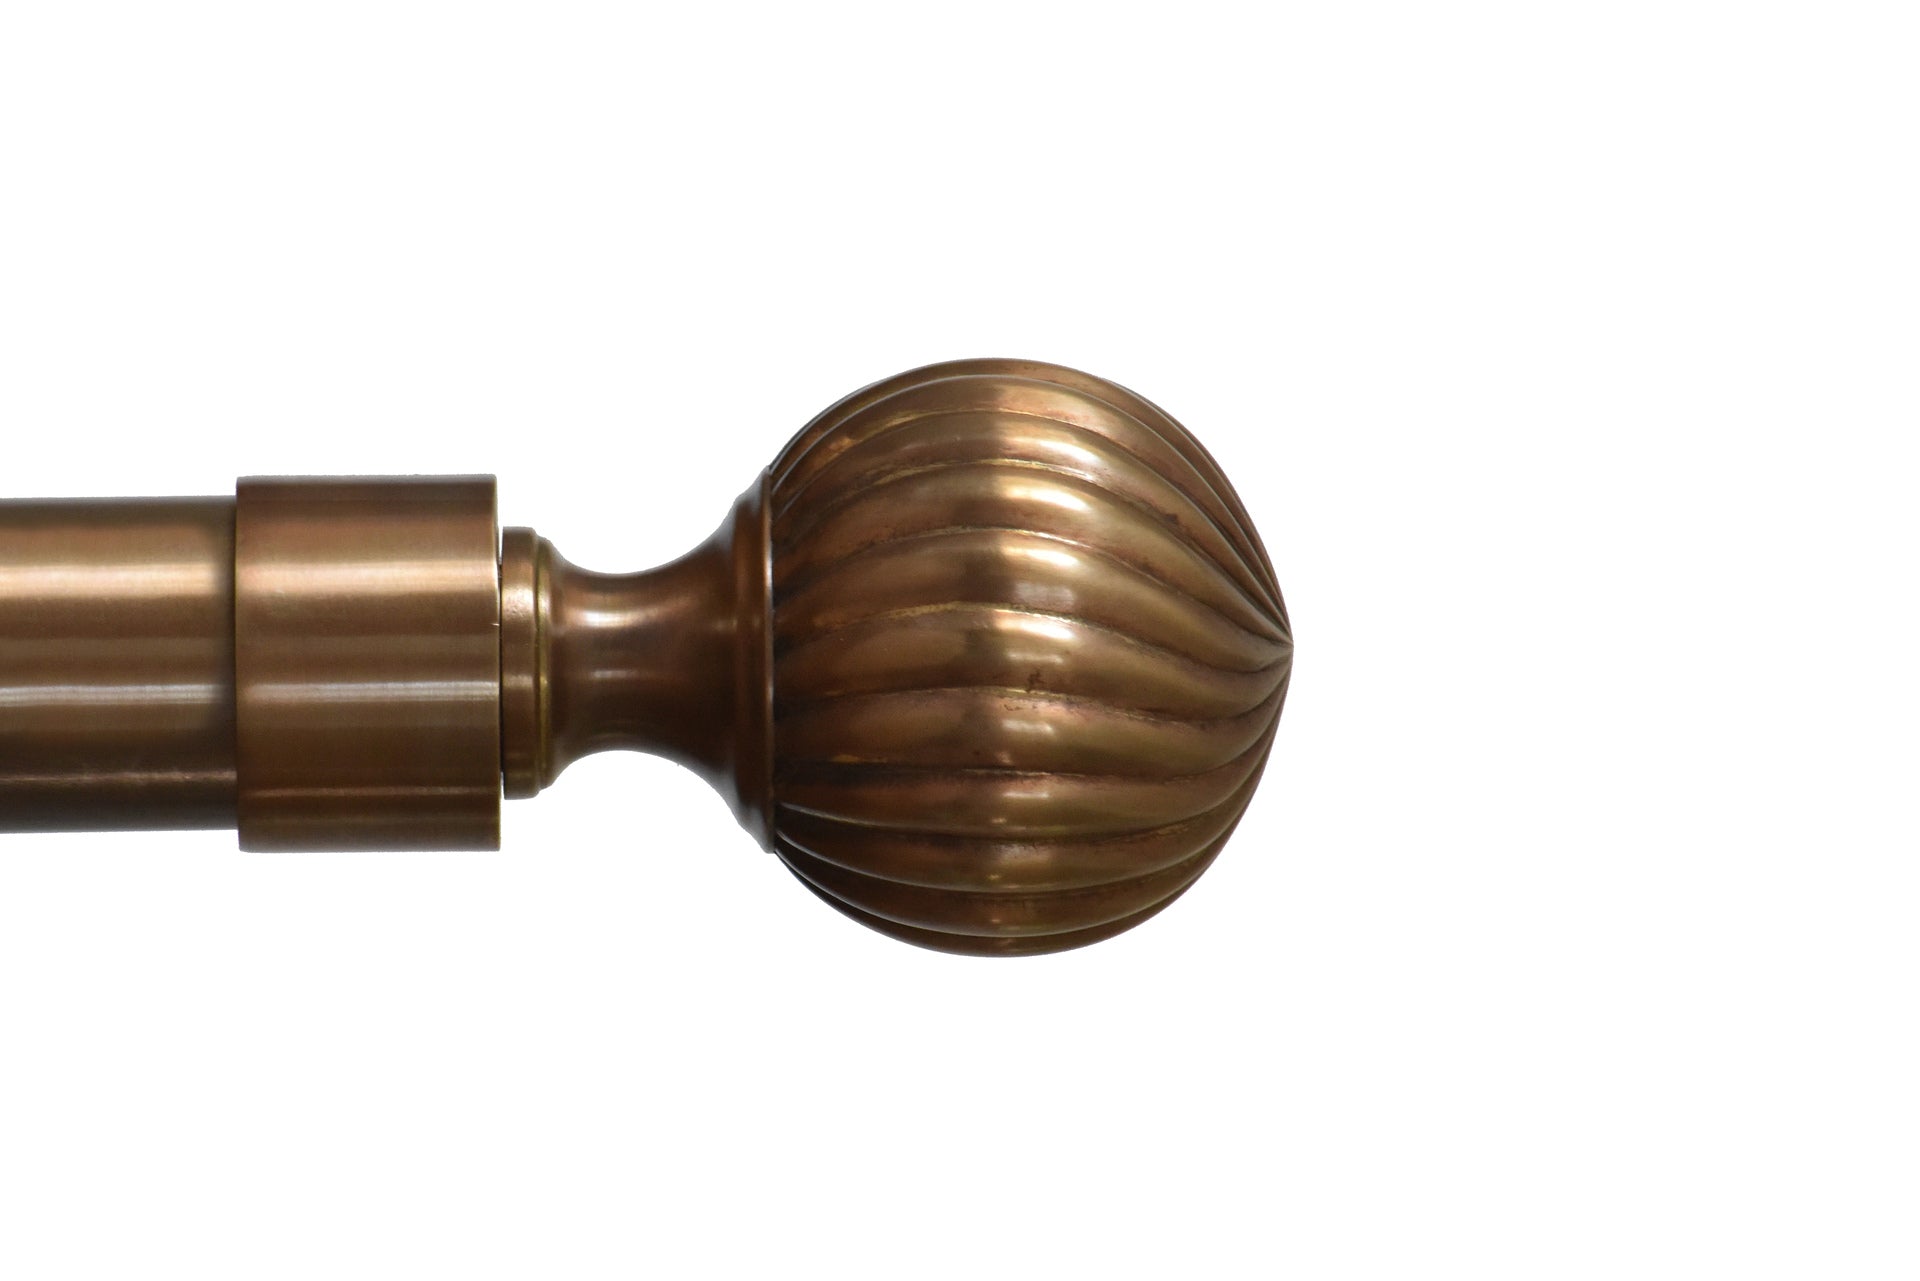 Tillys Twisted Ball Finial Curtain Pole Set in Antique Brass